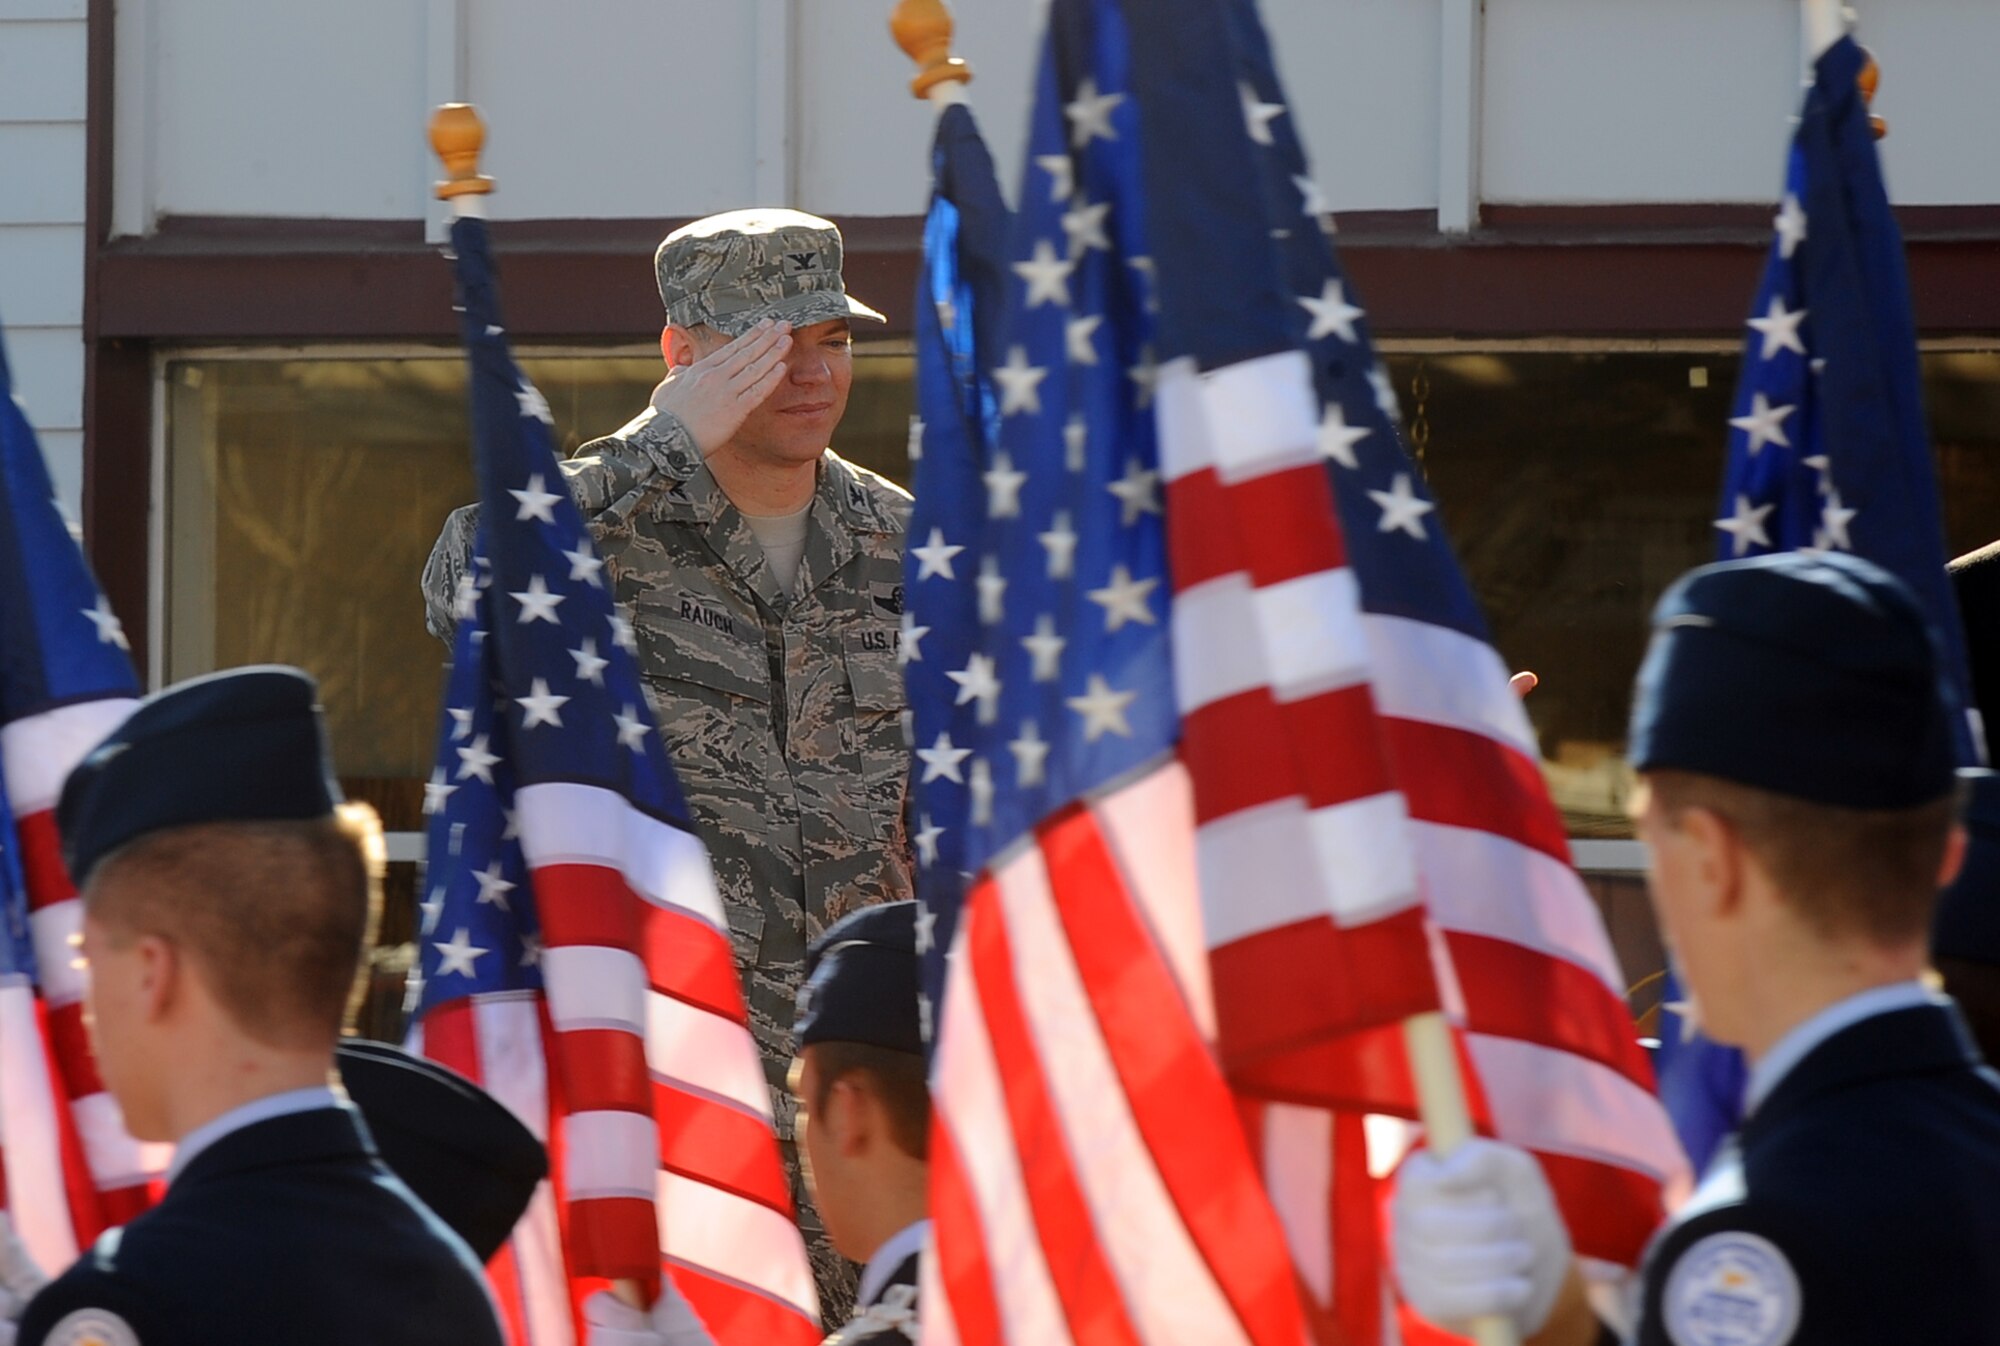 U.S. Air Force Col. John Rauch, 55th Wing commander, salutes the U.S. flags as they pass by on Mission Avenue while attending the annual Veterans Day parade in Bellevue, Neb., Nov. 10.  Team Offutt leadership stood on the grandstands at show central as the parade passed by.  (U.S. Air Force photo by Josh Plueger/Released)